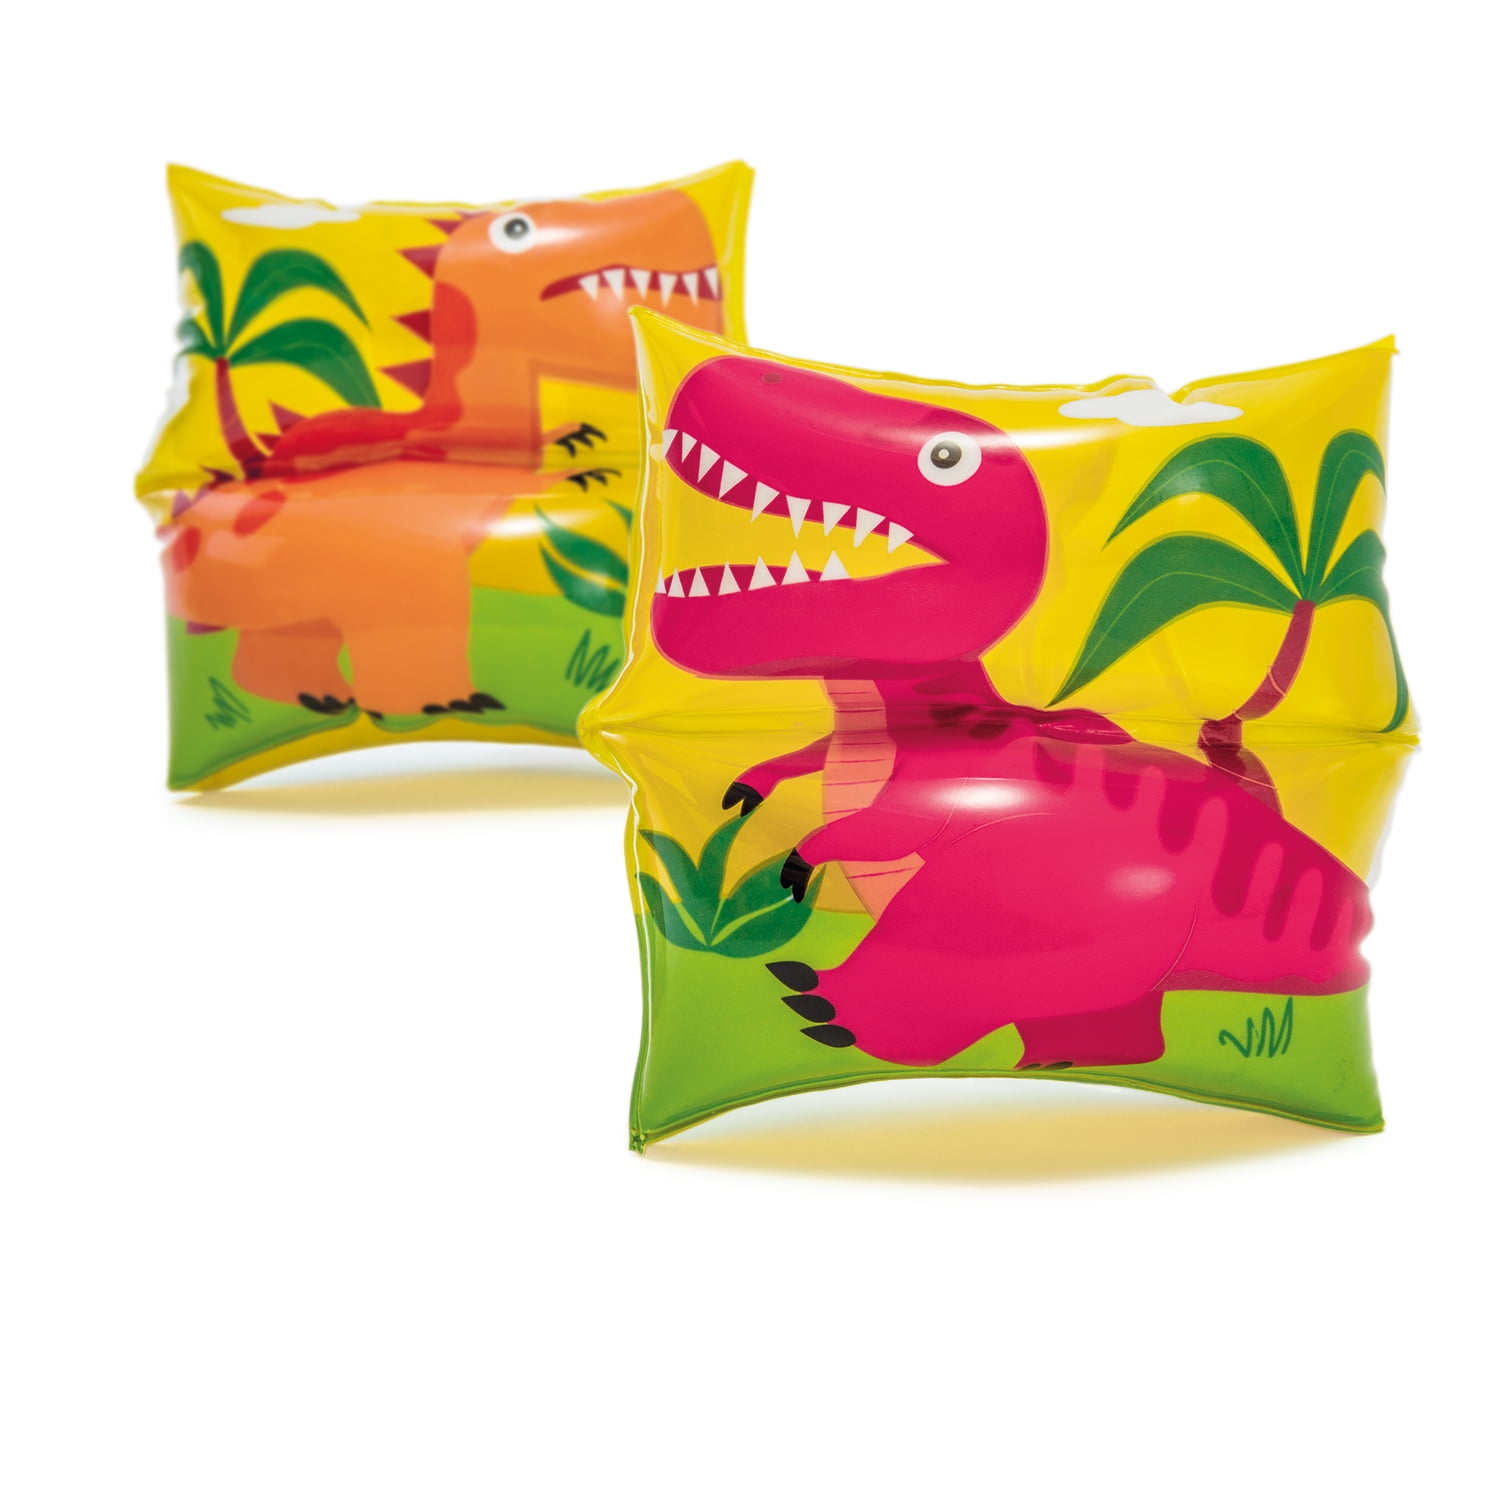 Intex Inflatable Arm Bands Dinosaur Mermaid or Sea Buddy for Ages 3 to 6 for sale online 